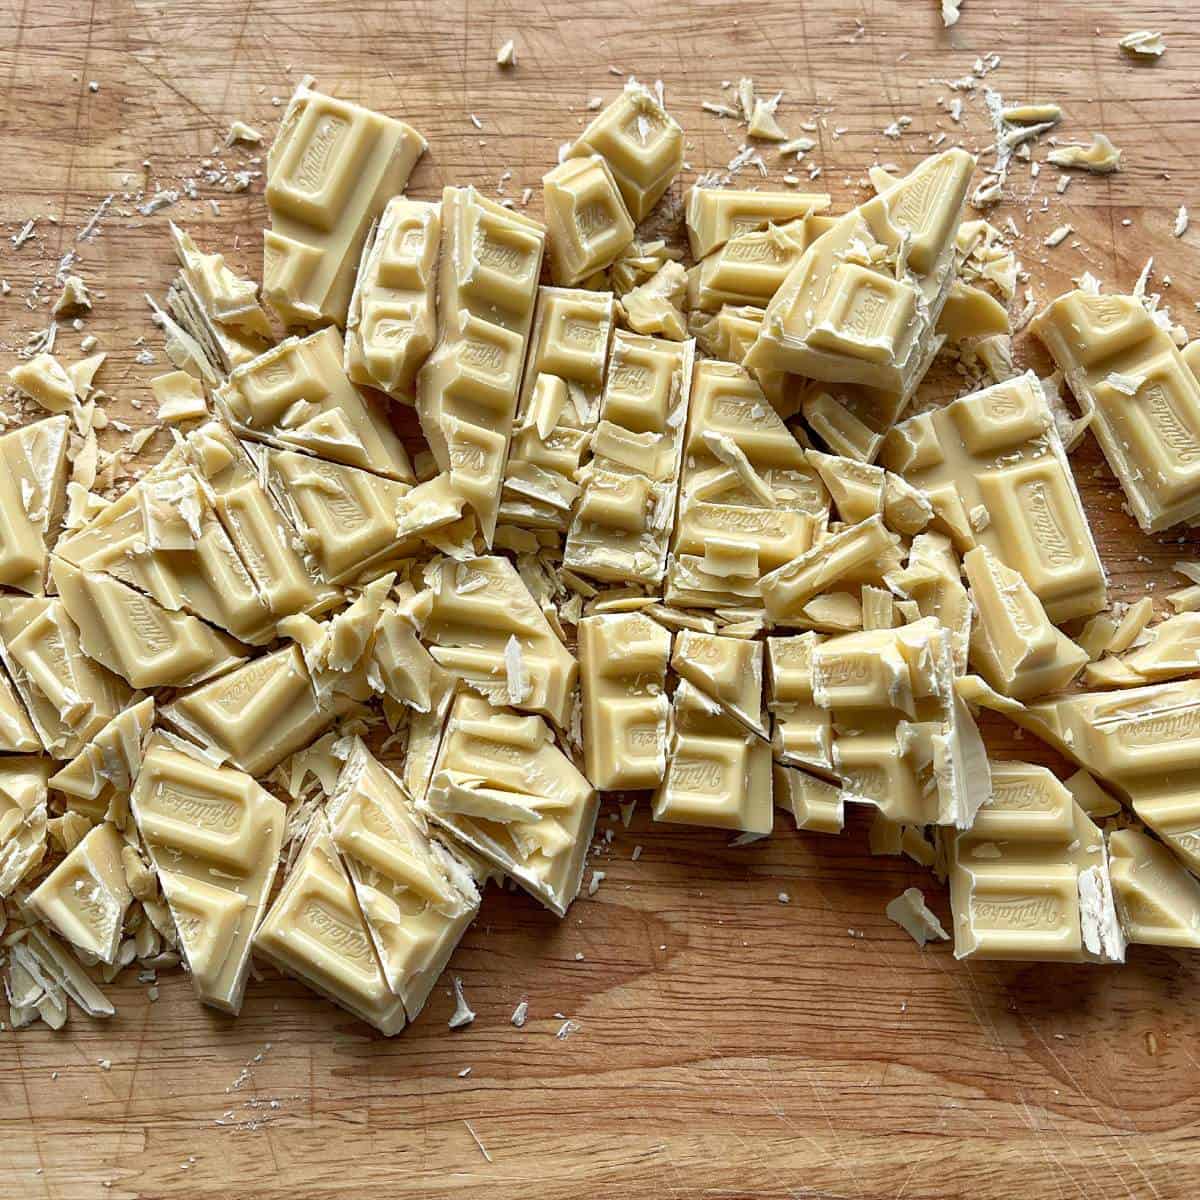 Broken pieces of white chocolate on a wooden chopping board